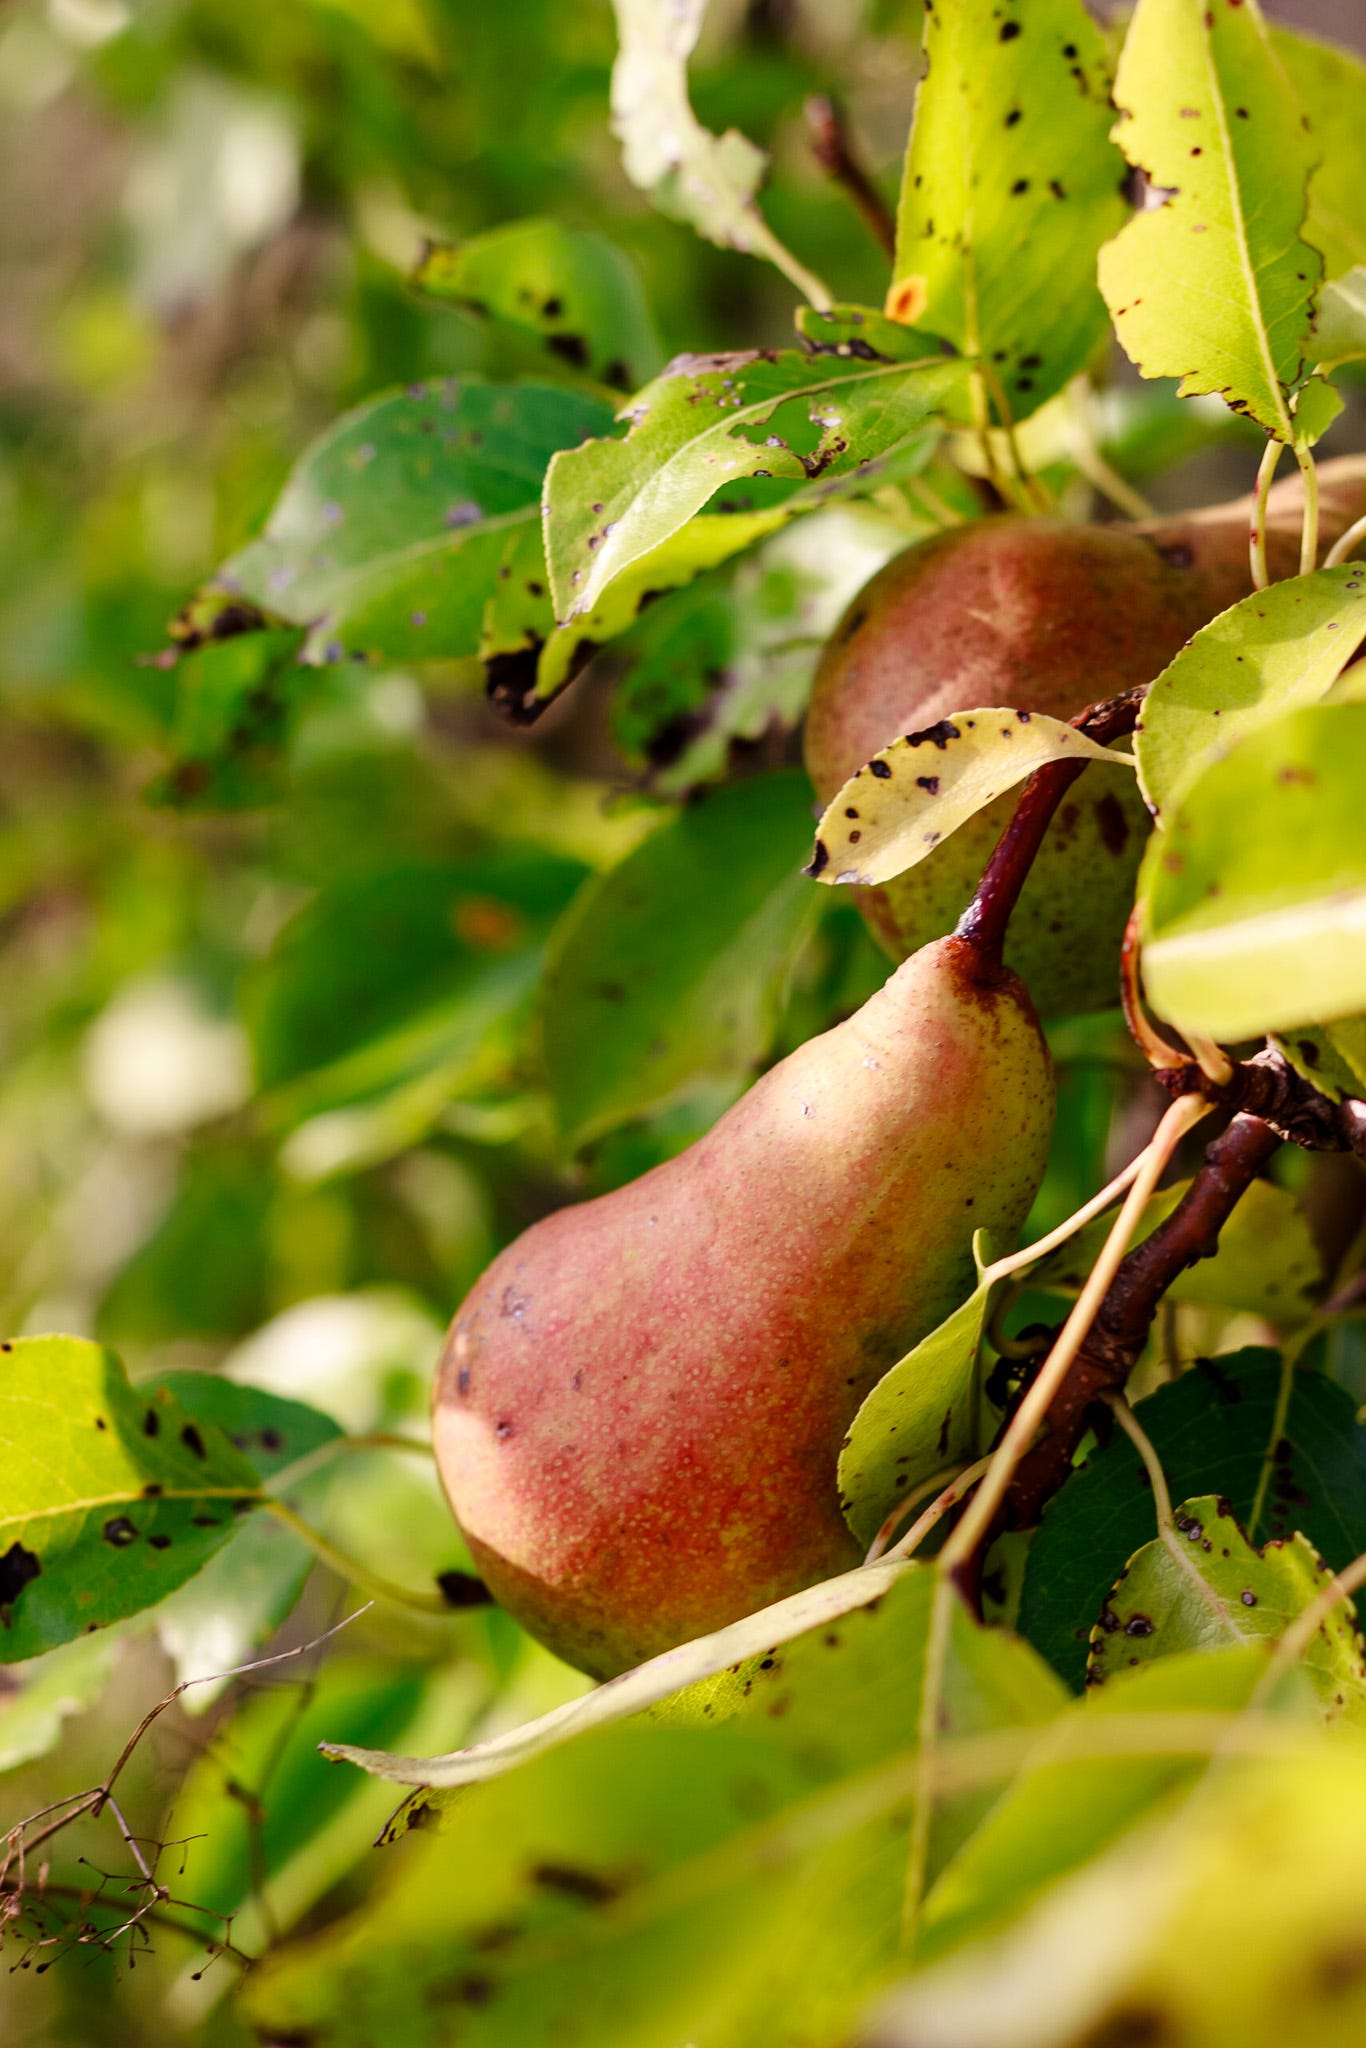 Sweet to Tart, Buttery to Crisp: A Farmers Market Guide to Pears